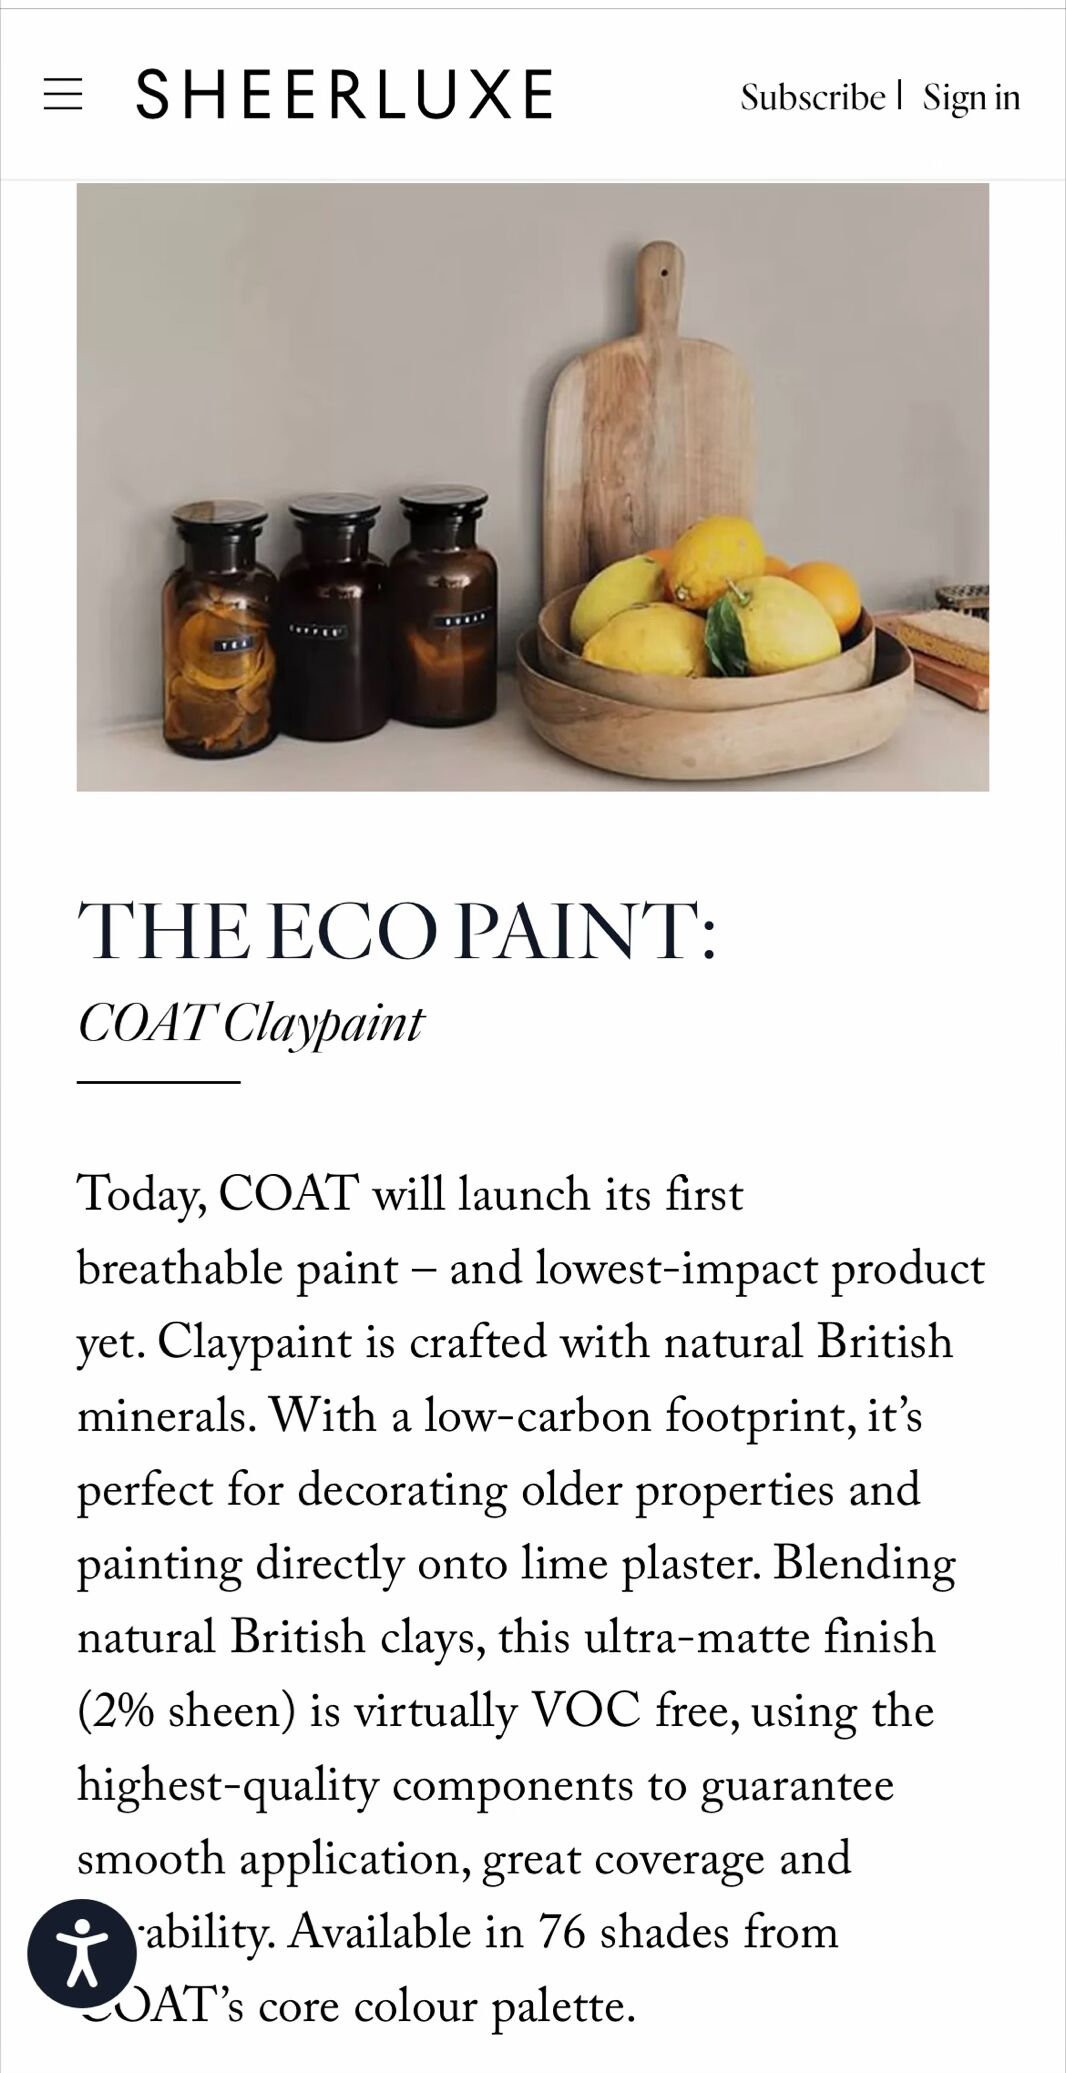 Sophie Corner on LinkedIn: Exciting week for COAT Paints as they launch ...